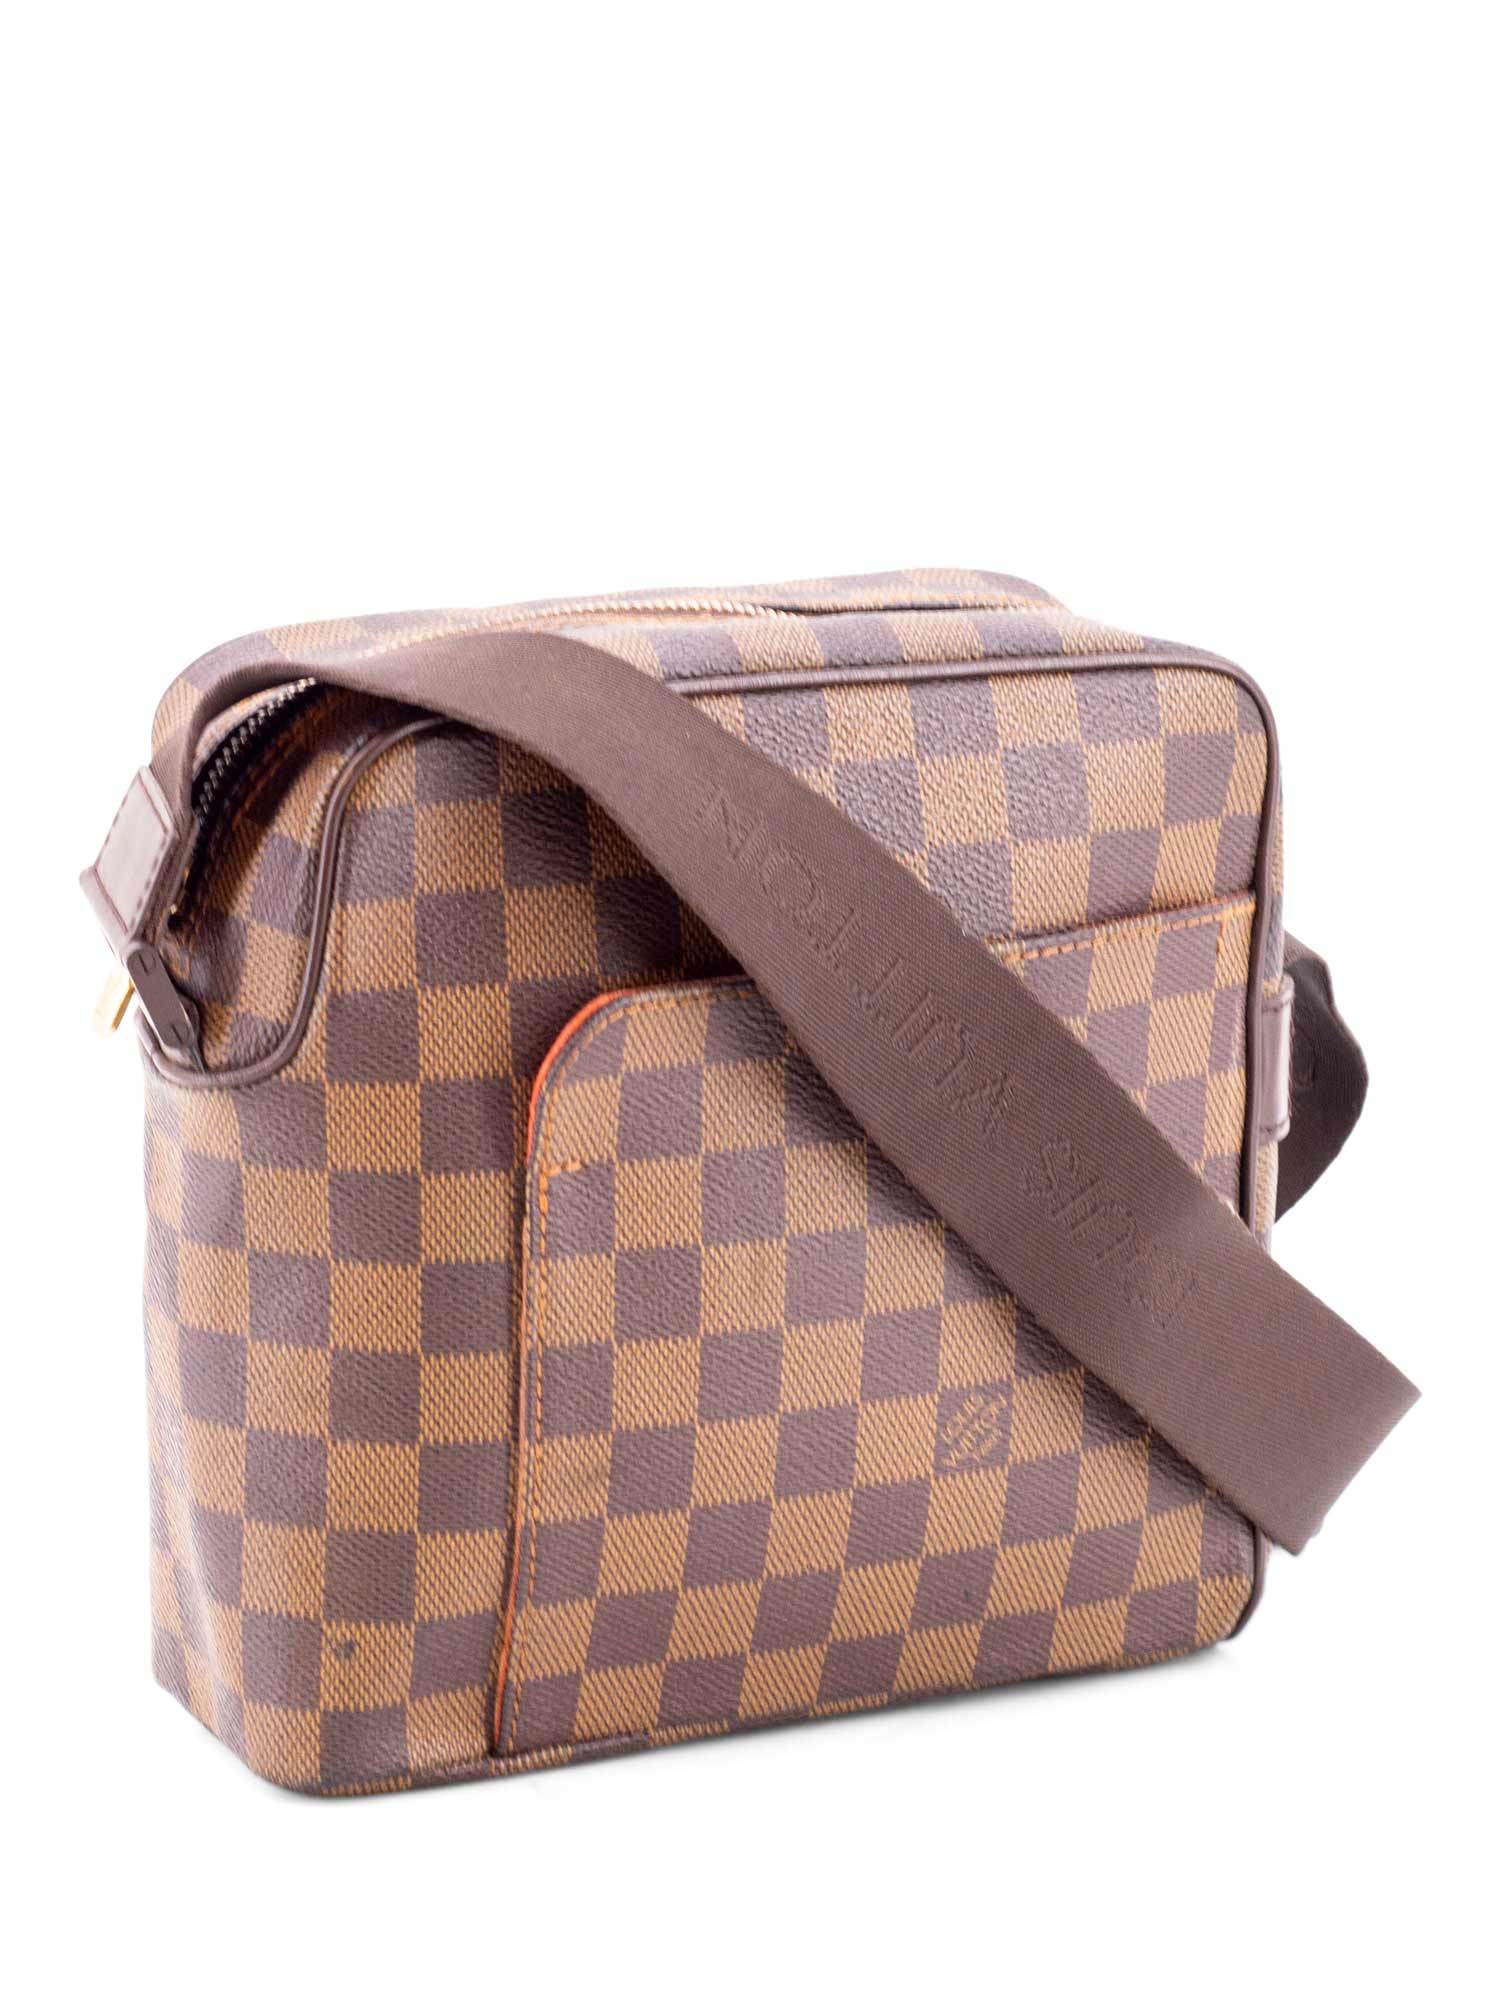 How to Tell a Real Louis Vuitton a Fake